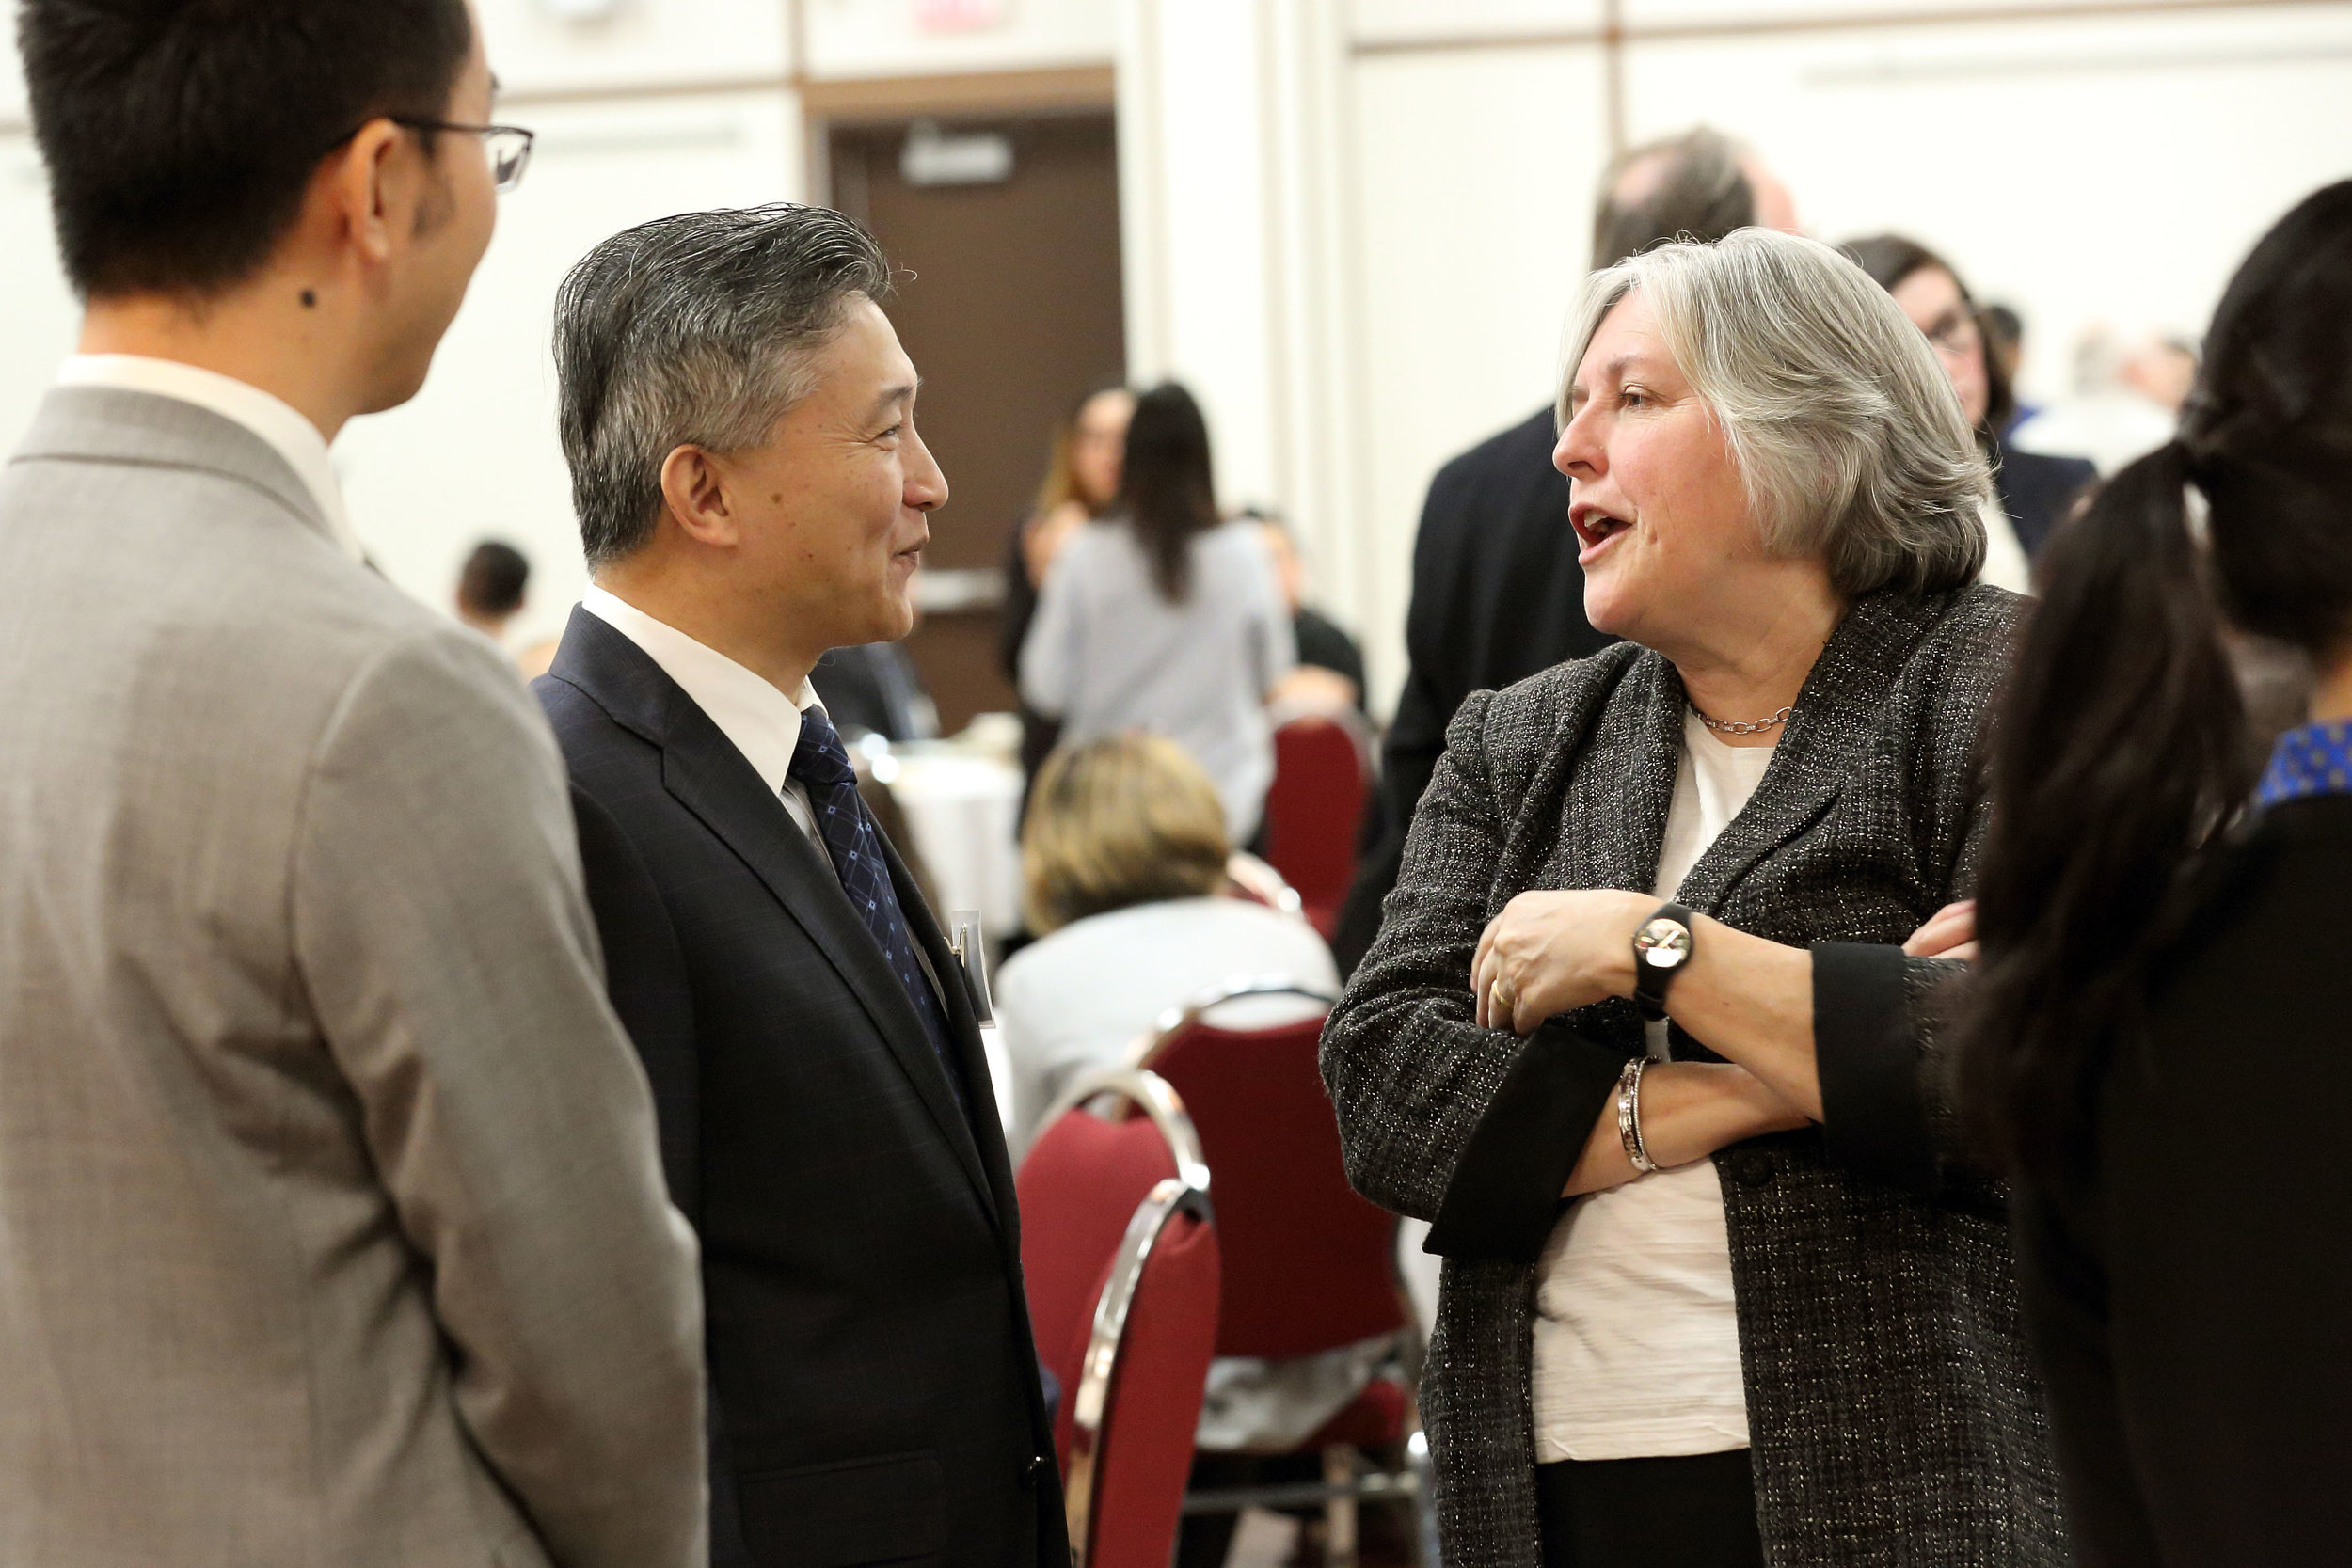   Minister and Counsellor Xia Xang, Embassy of the People’s Republic of China to Canada, with Dean Pat Bradshaw, Sobey School of Business  